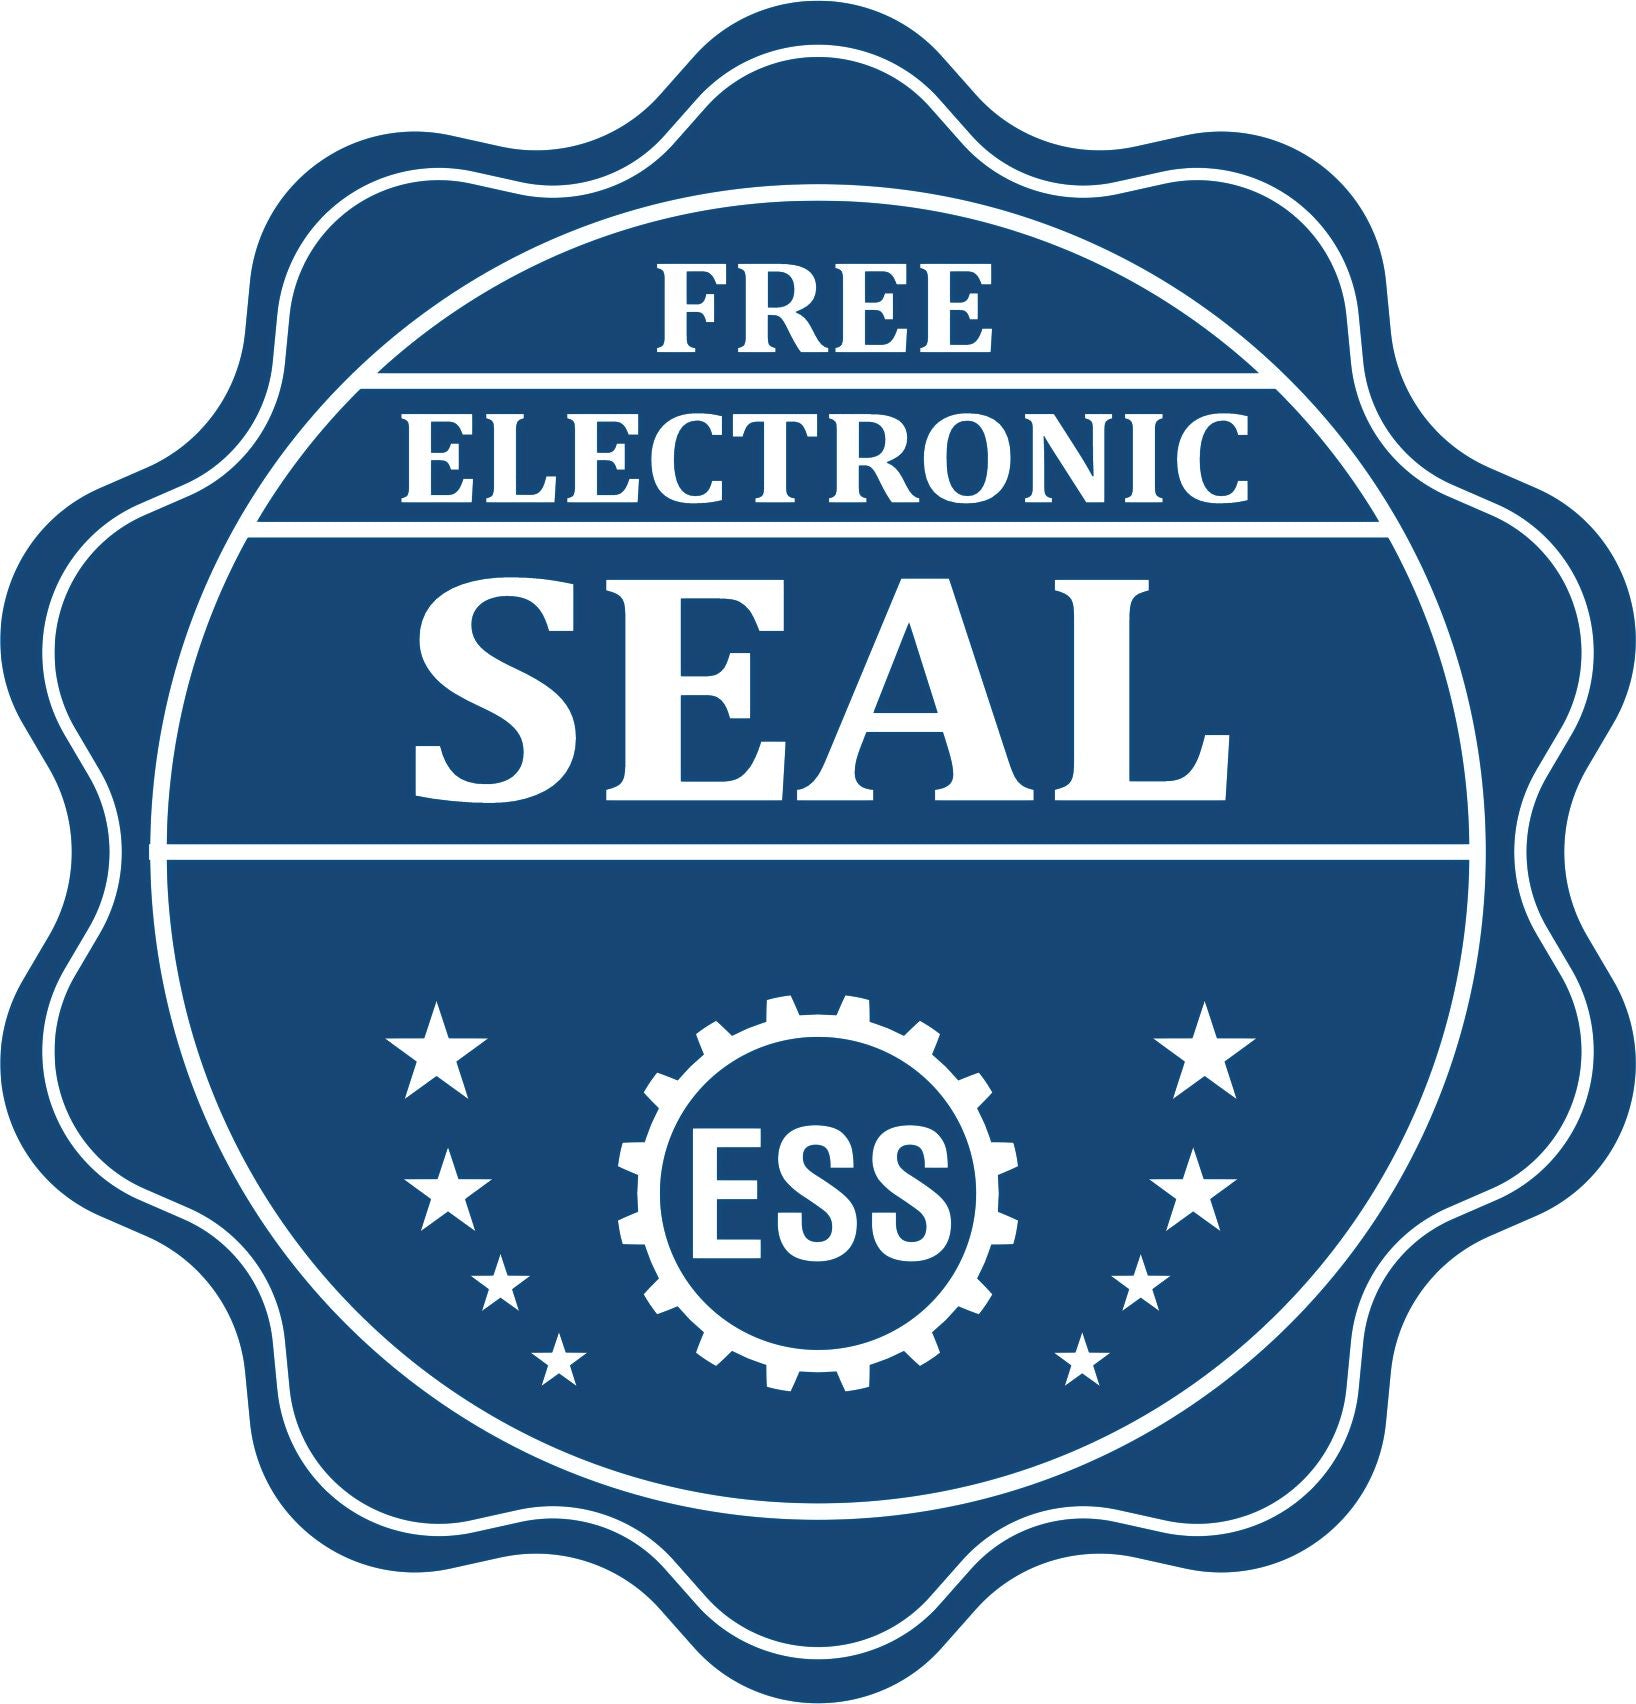 A badge showing a free electronic seal for the Handheld Iowa Architect Seal Embosser with stars and the ESS gear on the emblem.